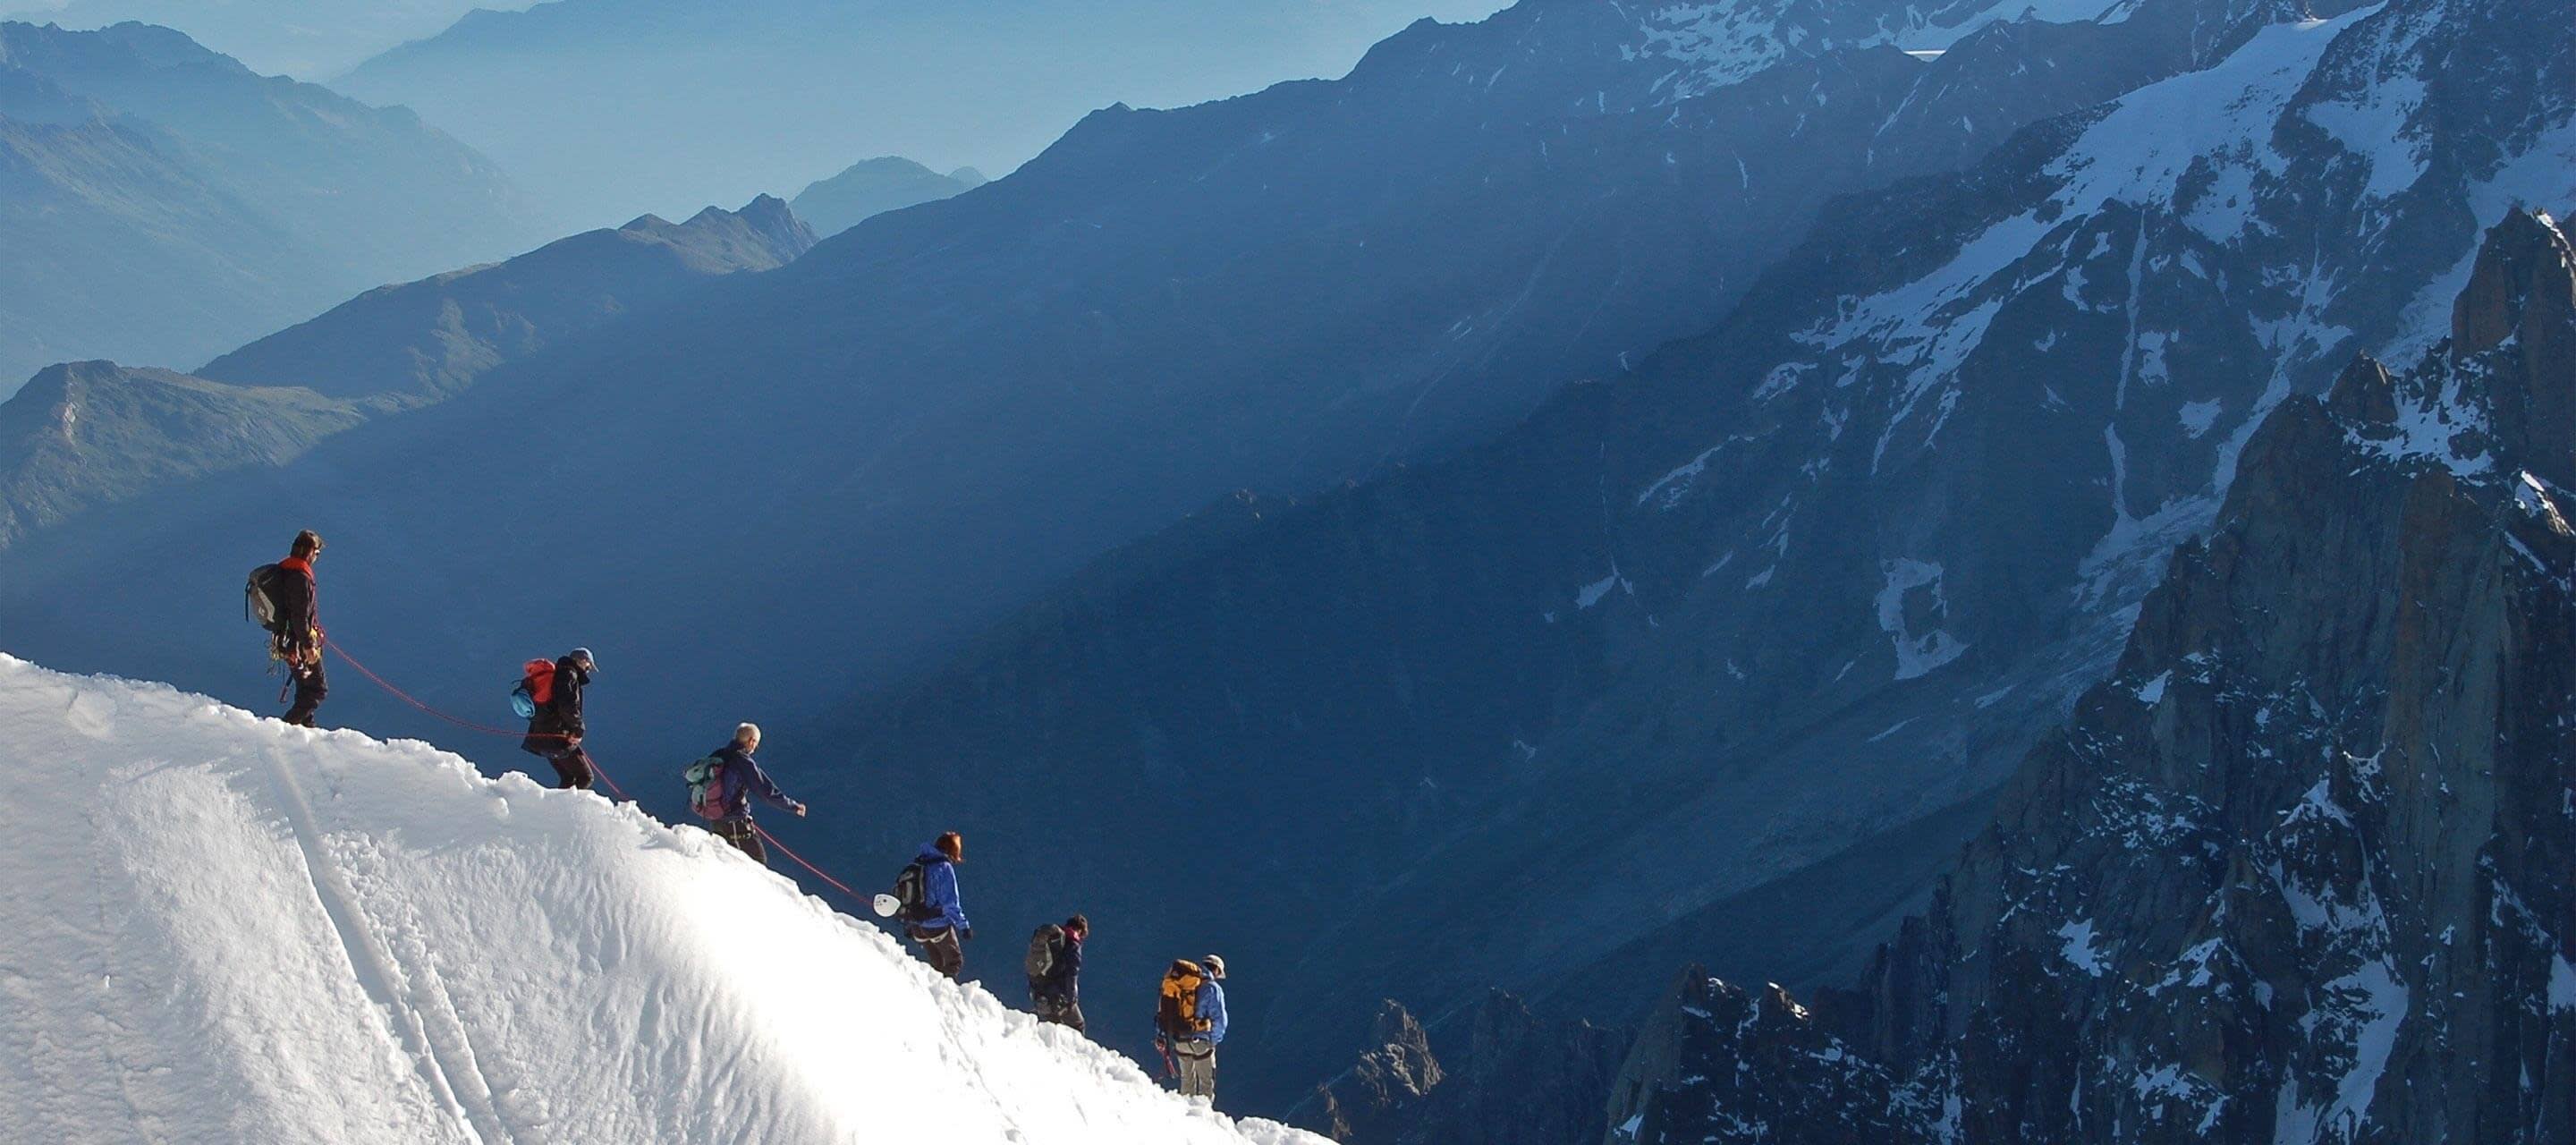 image of a group of hikers going down a snowy hill, mountains in background